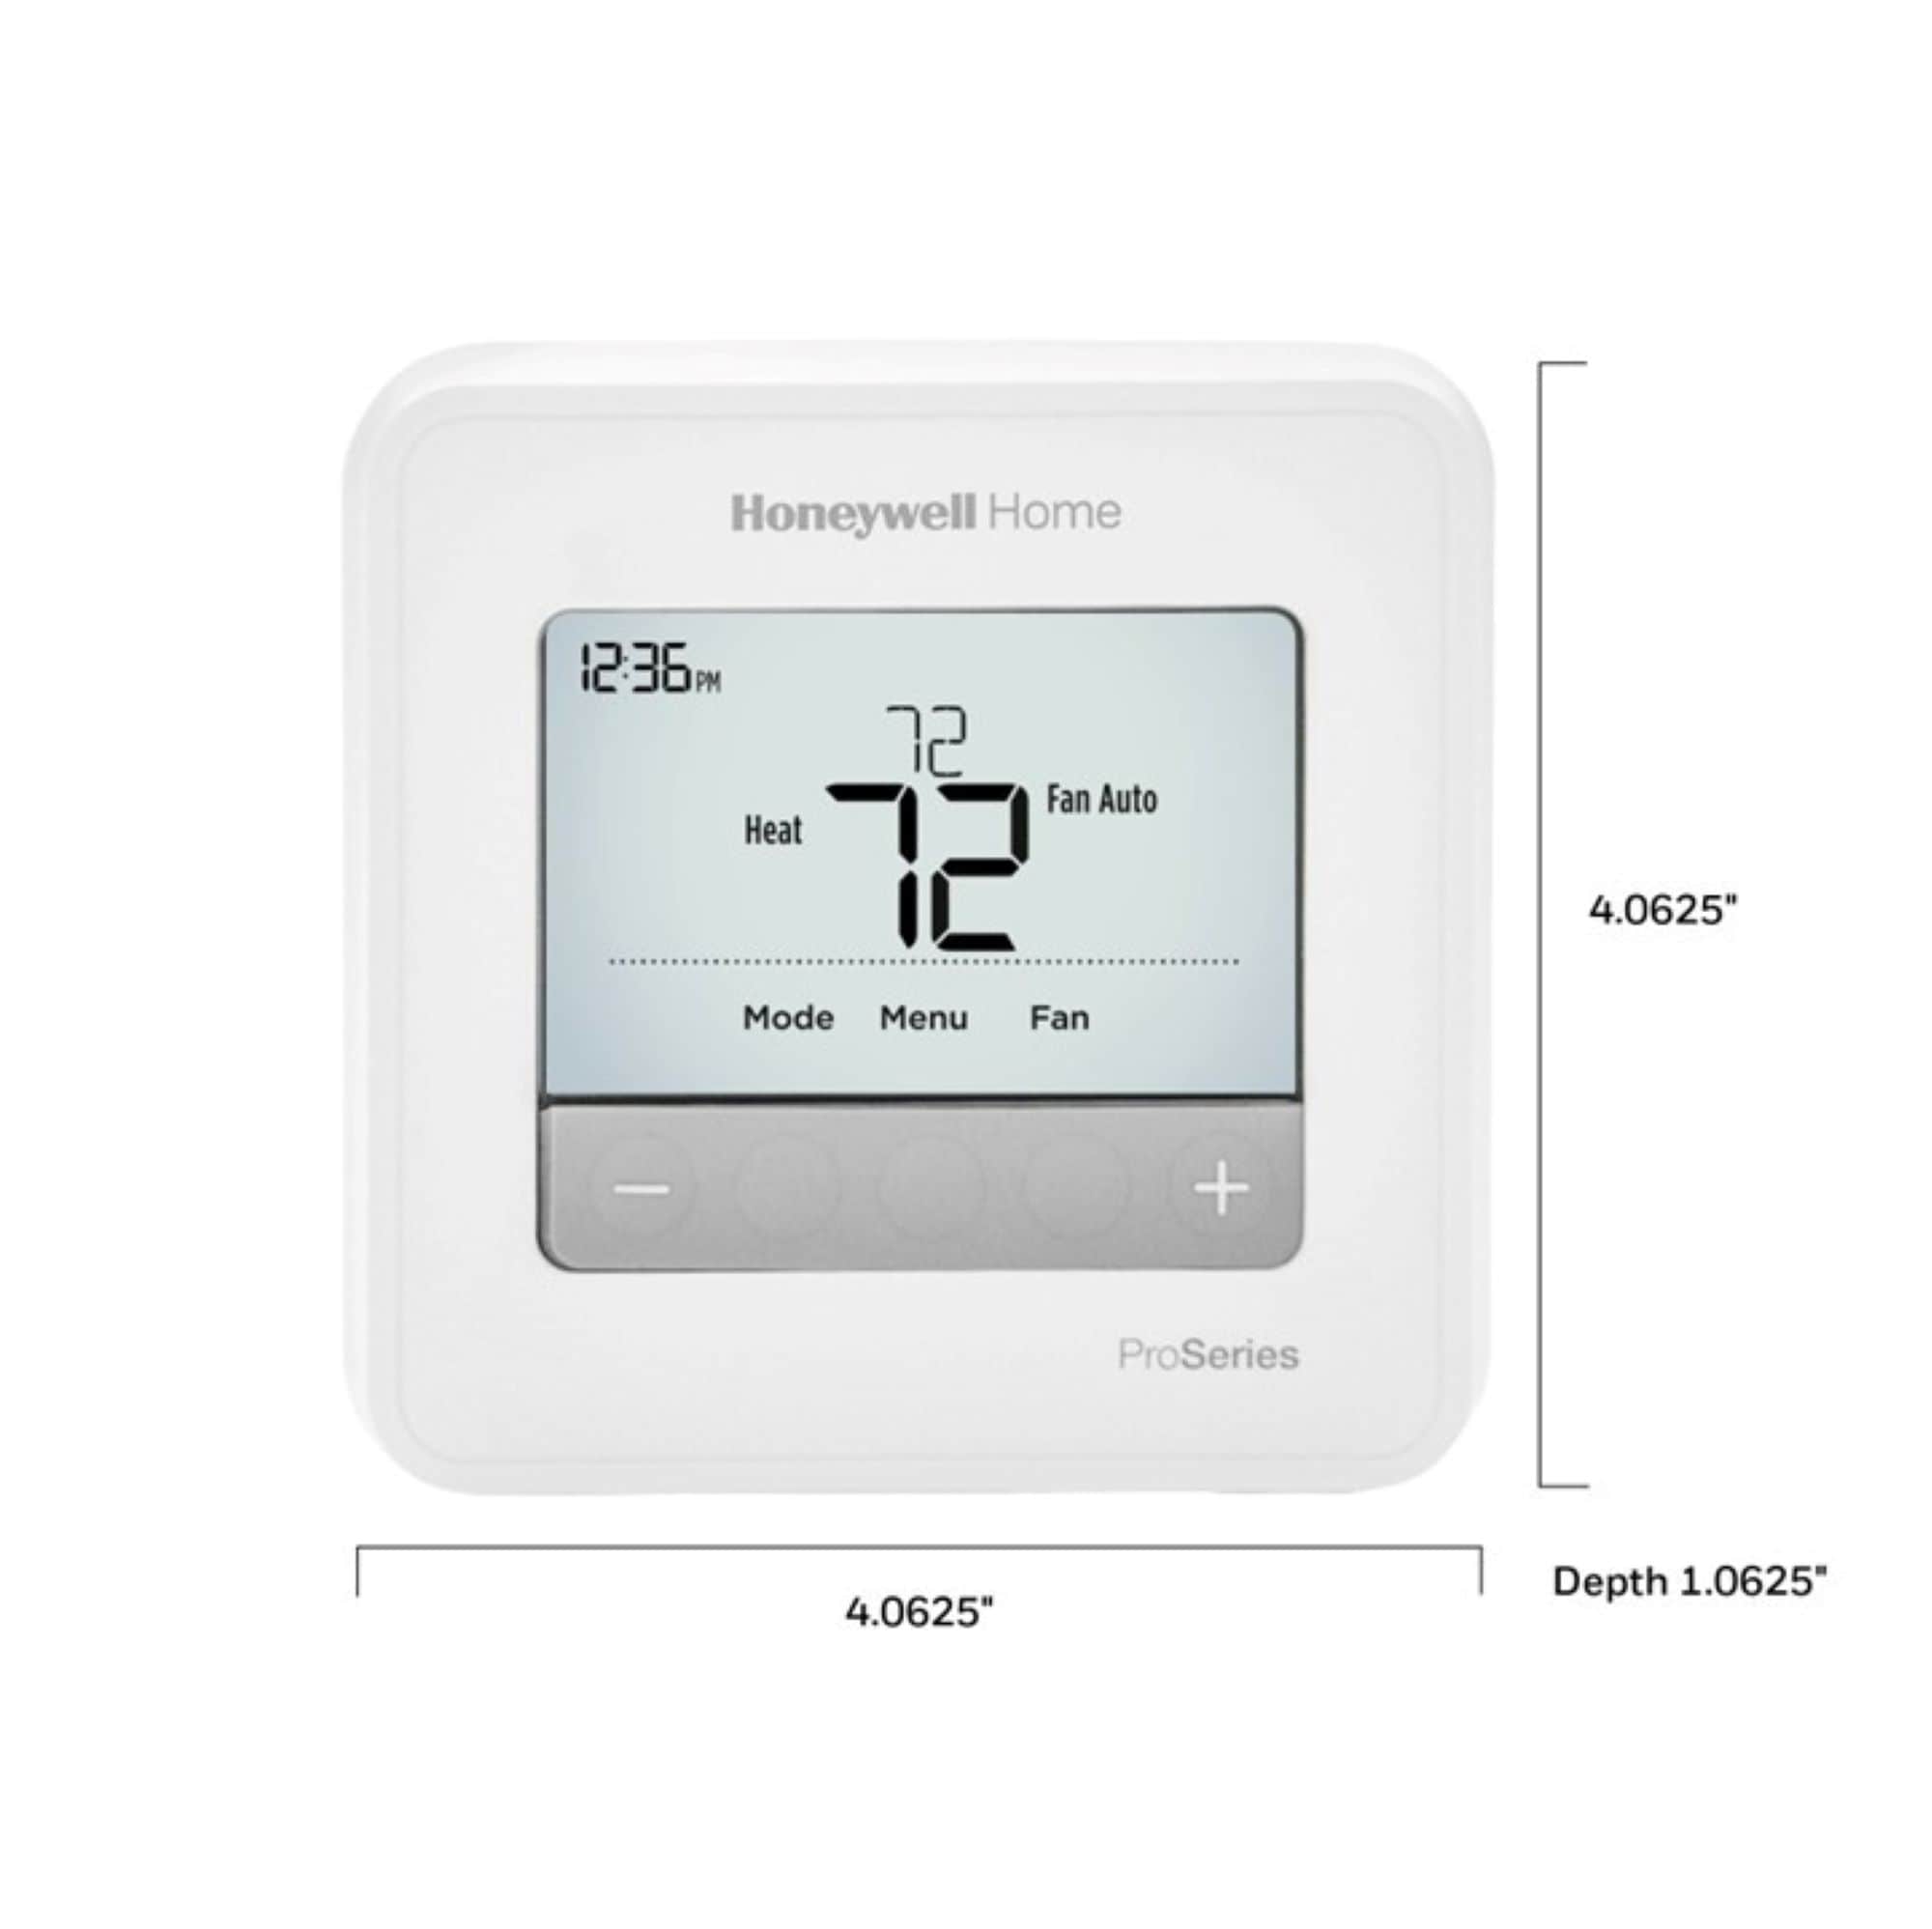 Honeywell Home T4 24-Volt 5-2 Day Touch Screen Programmable Thermostat